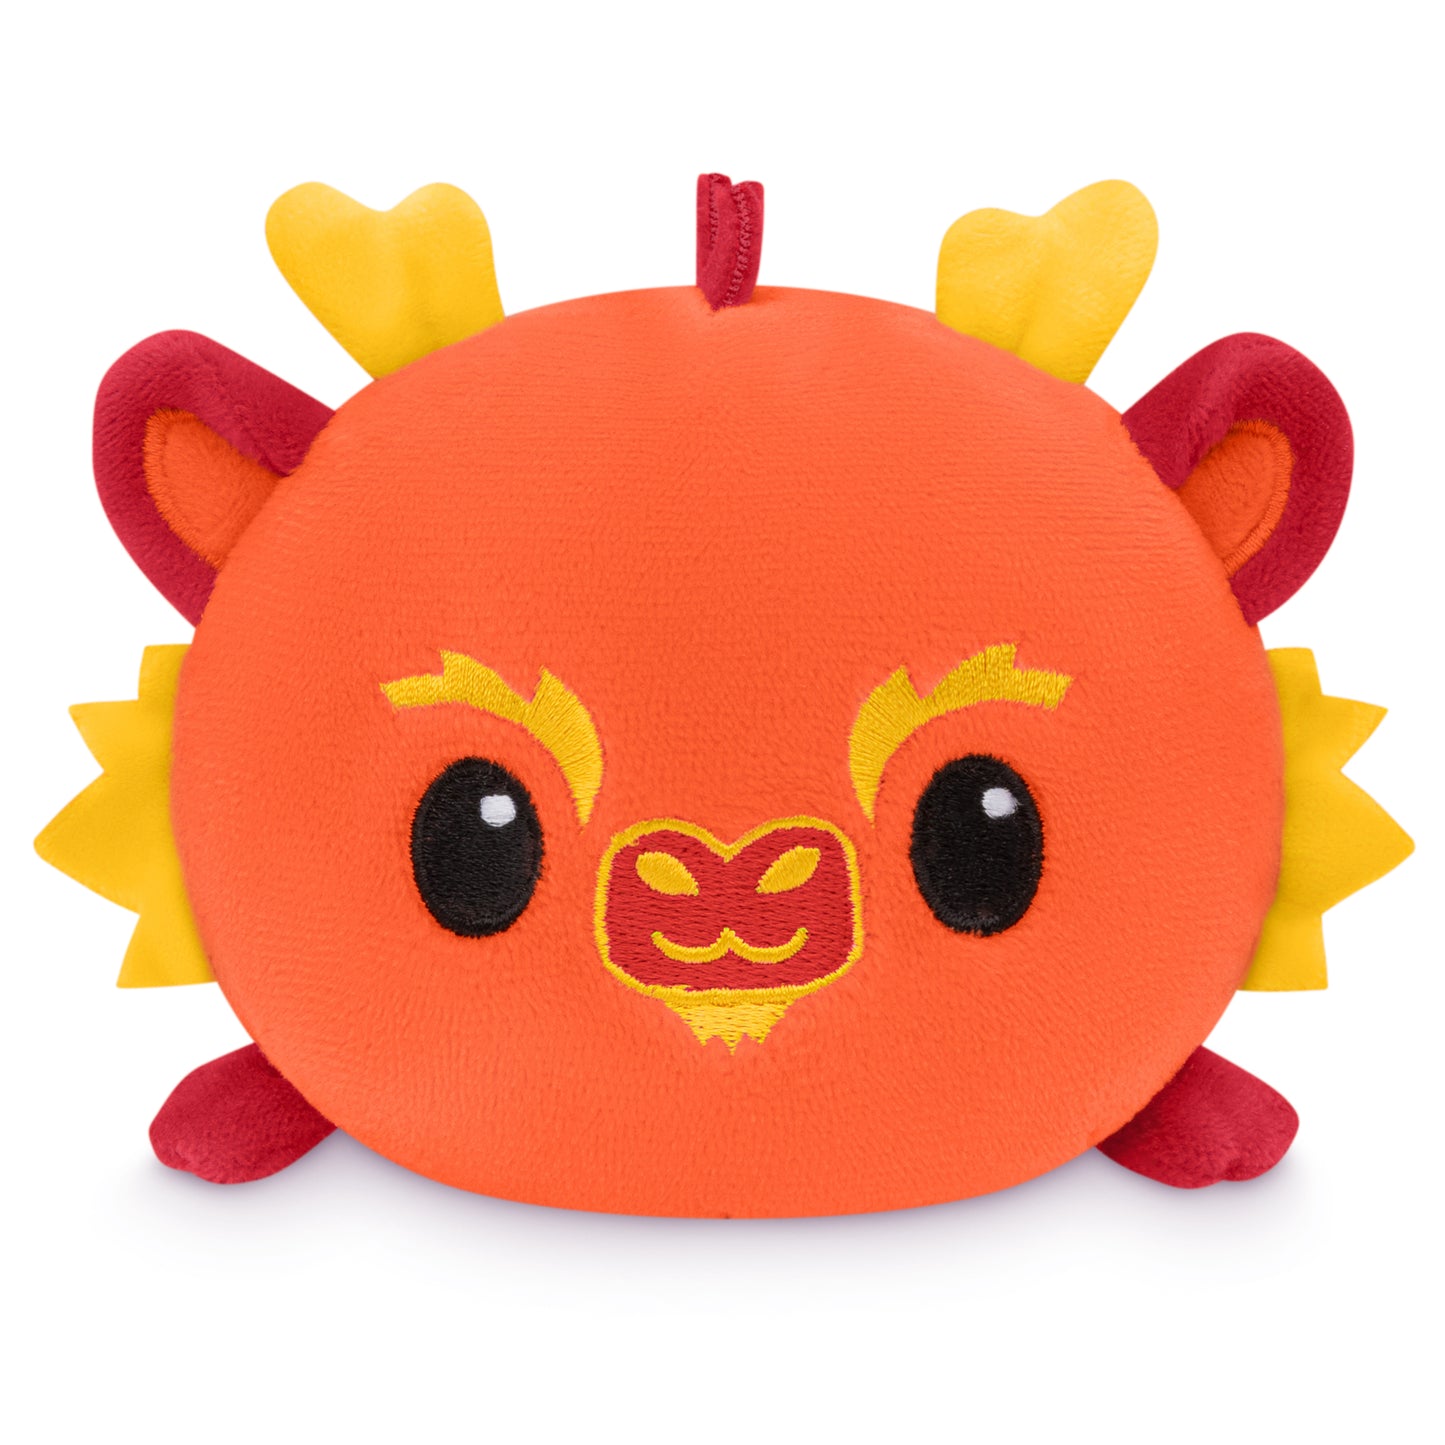 A Plushiverse Lunar New Year Dragon plushie tote bag with a red and yellow face.